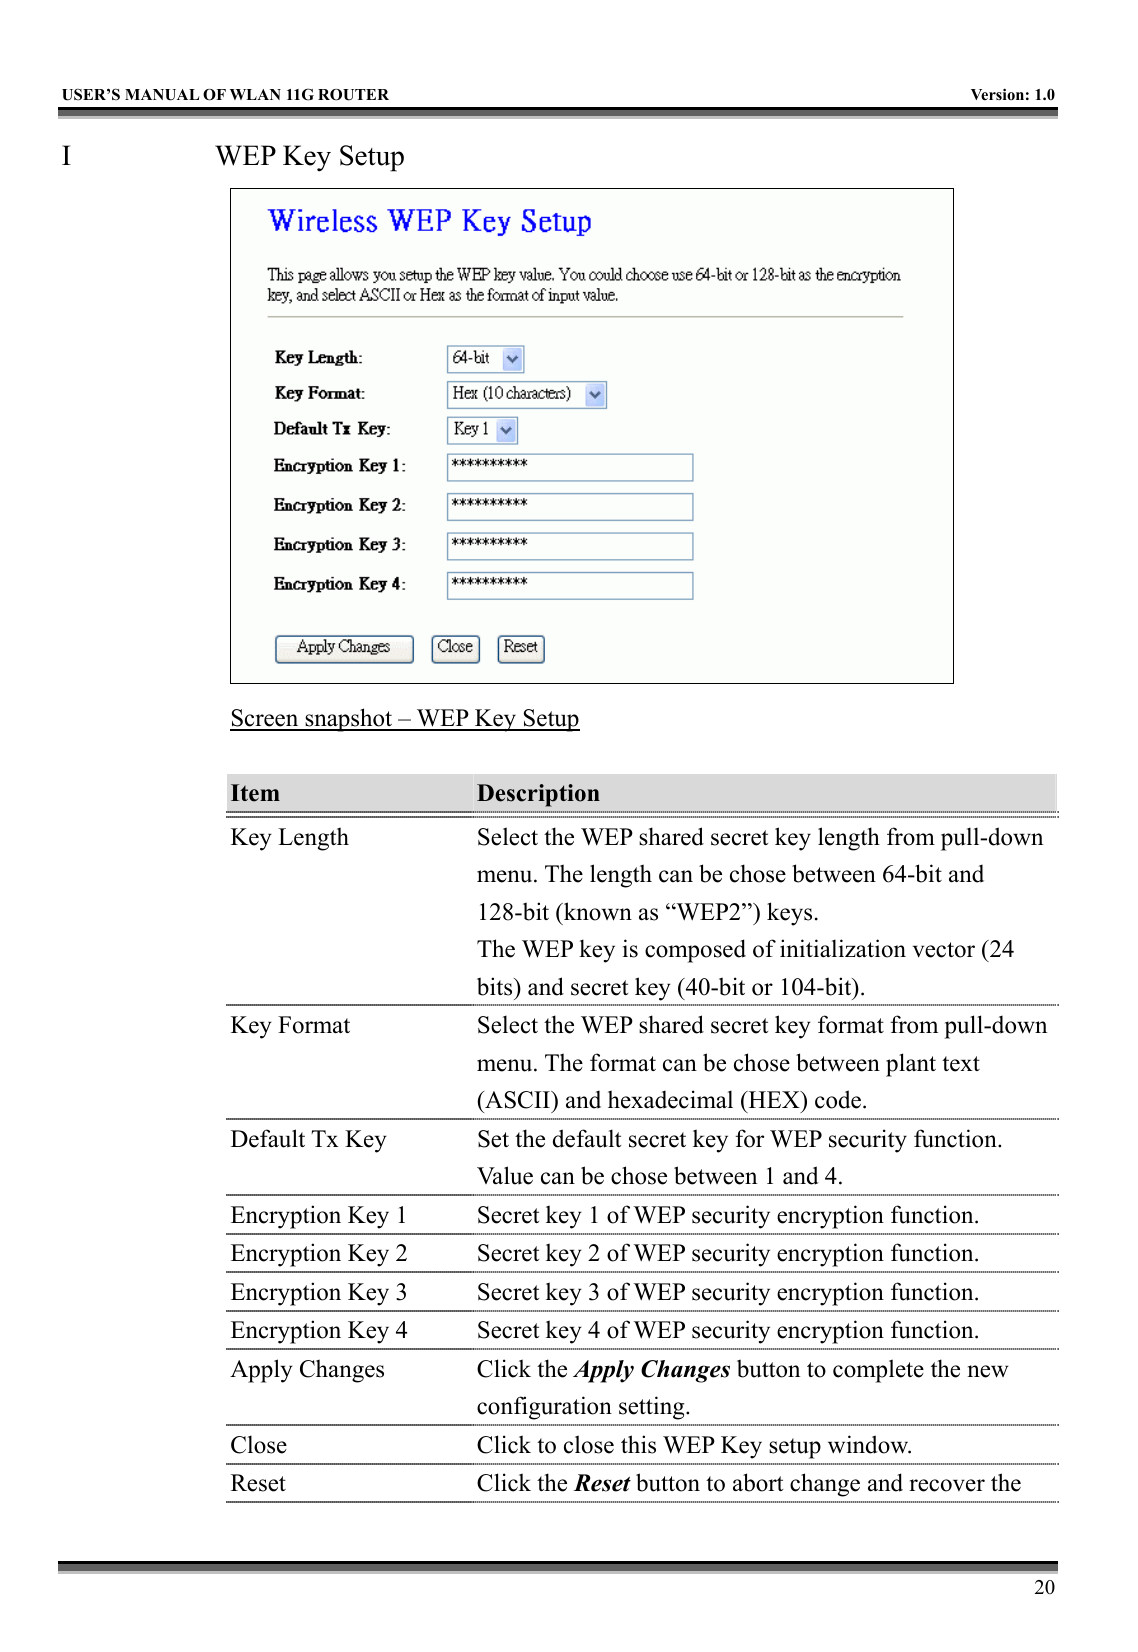   USER’S MANUAL OF WLAN 11G ROUTER    Version: 1.0     20 I  WEP Key Setup  Screen snapshot – WEP Key Setup  Item  Description   Key Length  Select the WEP shared secret key length from pull-down menu. The length can be chose between 64-bit and 128-bit (known as “WEP2”) keys.   The WEP key is composed of initialization vector (24 bits) and secret key (40-bit or 104-bit). Key Format  Select the WEP shared secret key format from pull-down menu. The format can be chose between plant text (ASCII) and hexadecimal (HEX) code. Default Tx Key  Set the default secret key for WEP security function. Value can be chose between 1 and 4. Encryption Key 1  Secret key 1 of WEP security encryption function. Encryption Key 2  Secret key 2 of WEP security encryption function. Encryption Key 3  Secret key 3 of WEP security encryption function. Encryption Key 4  Secret key 4 of WEP security encryption function. Apply Changes  Click the Apply Changes button to complete the new configuration setting. Close  Click to close this WEP Key setup window. Reset Click the Reset button to abort change and recover the 